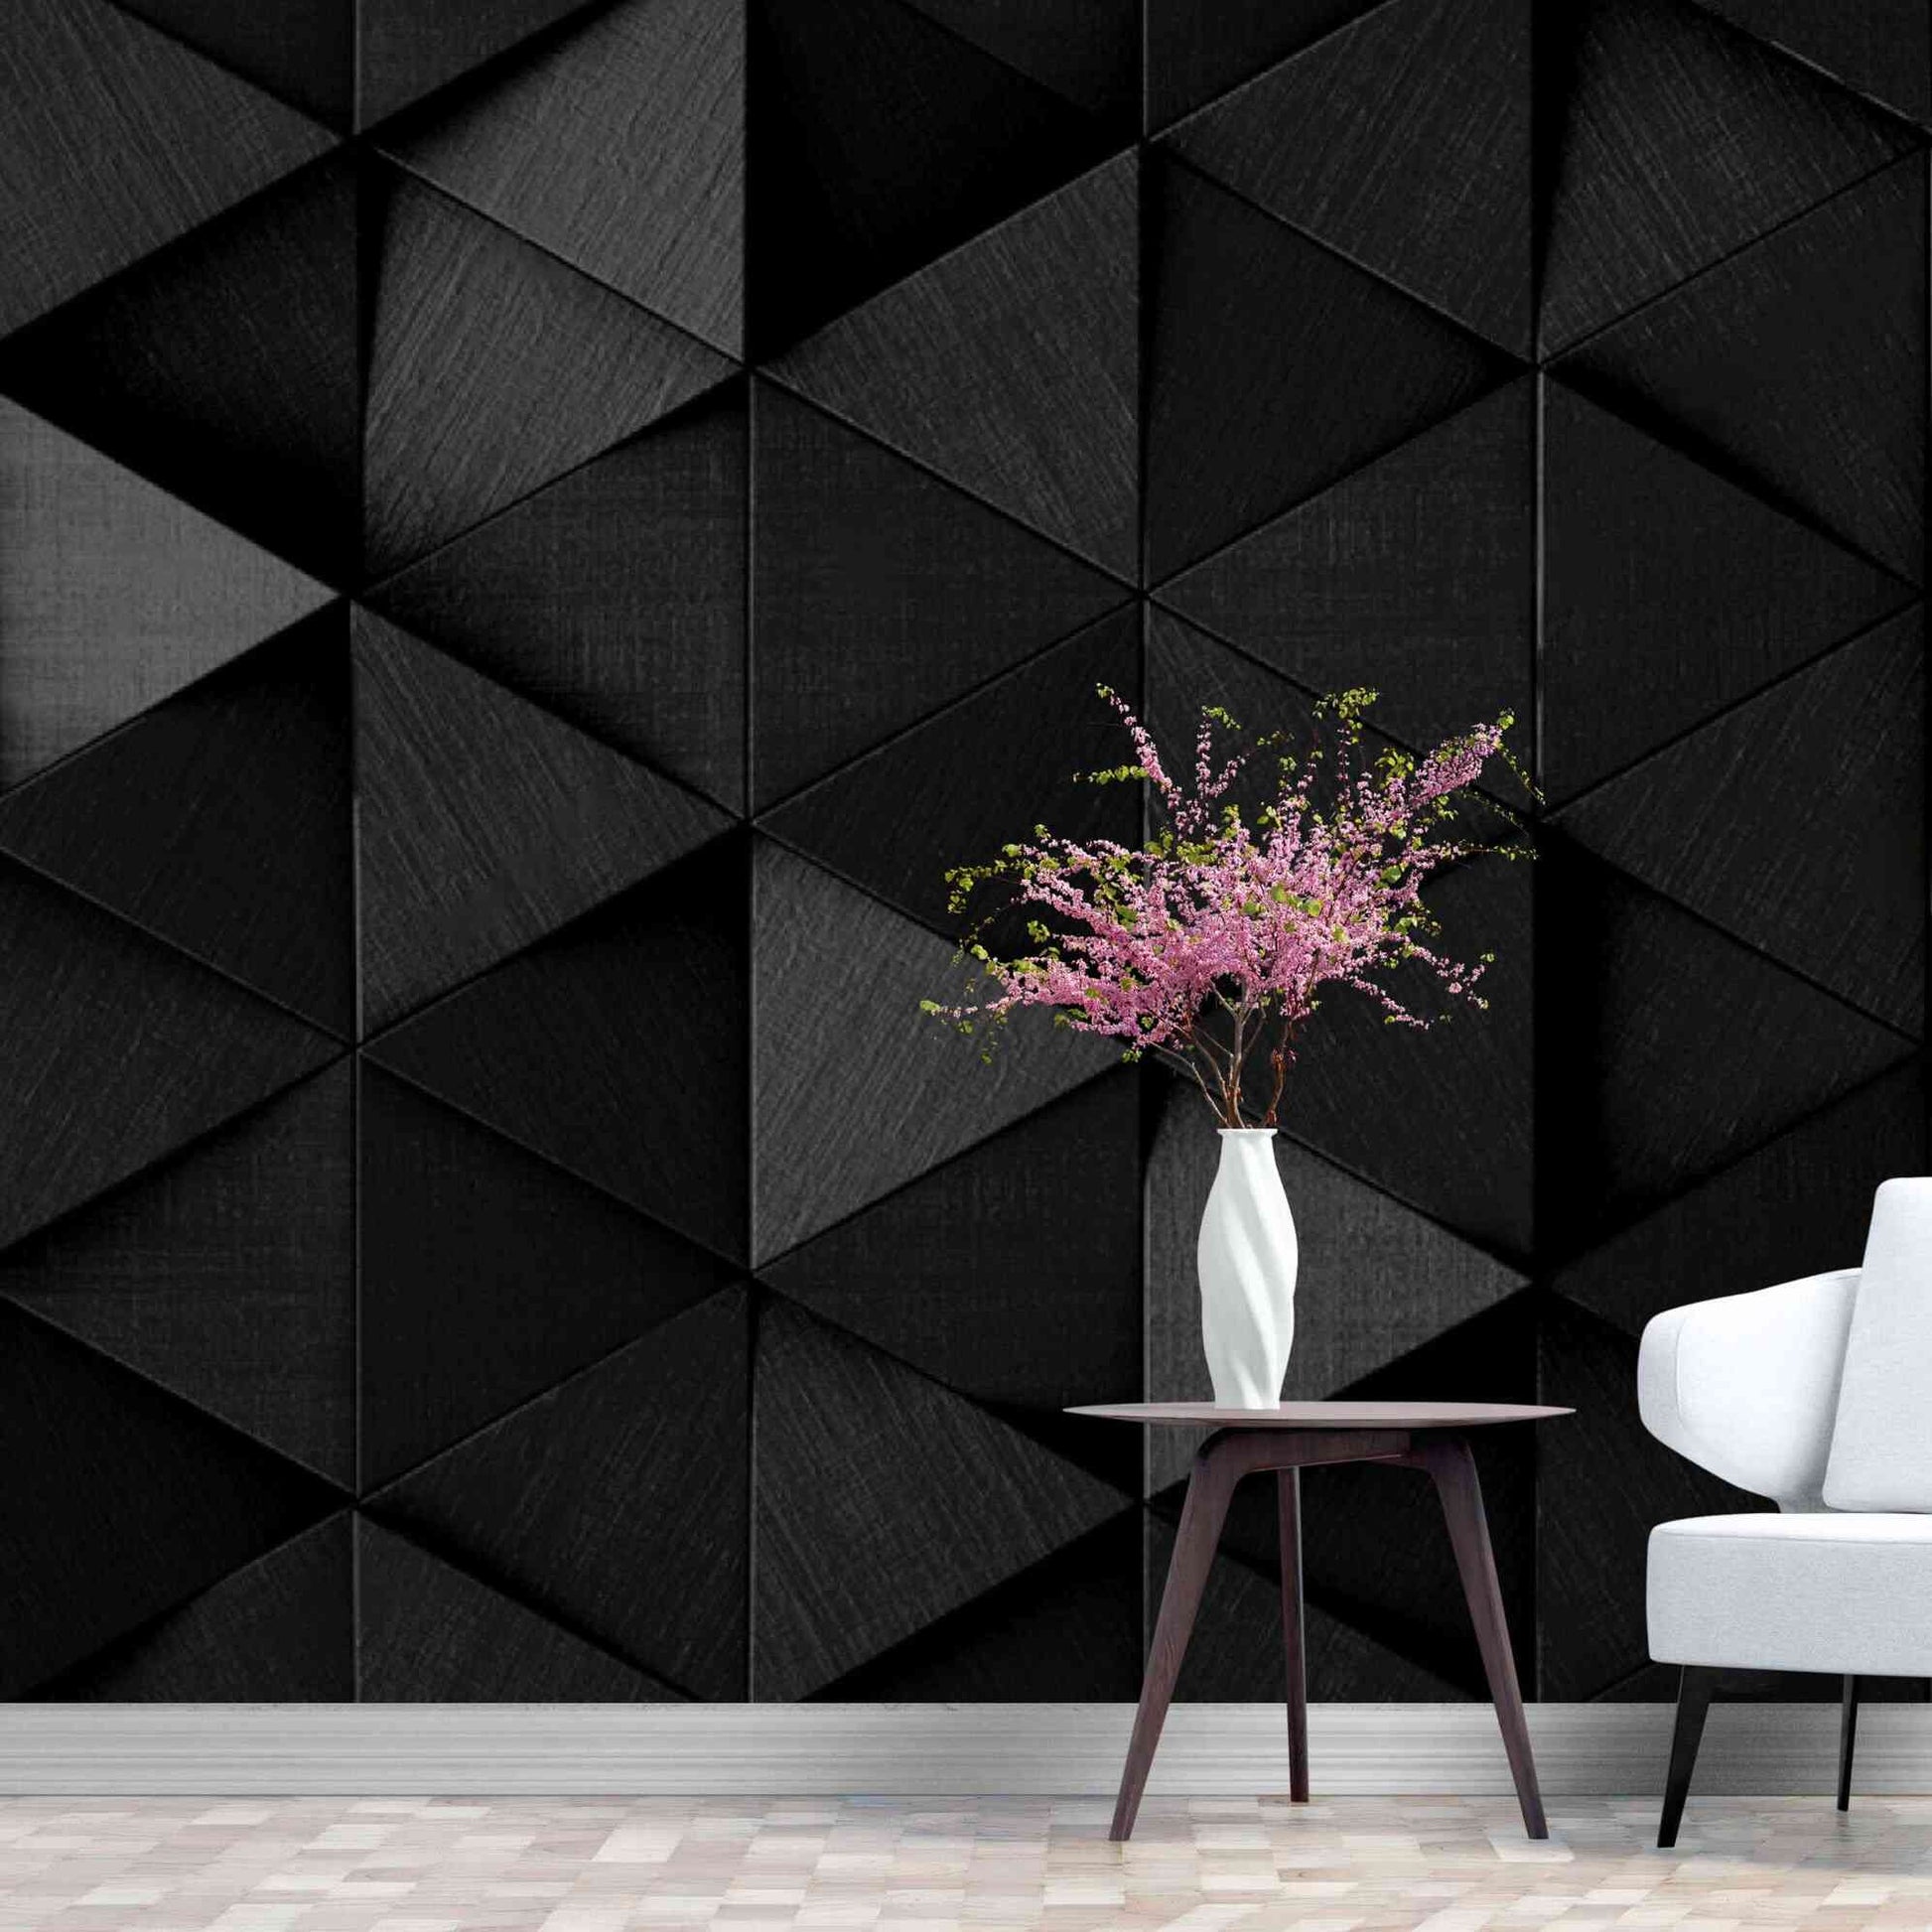 Dark 3D wallpaper with triangle pattern creating depth and dimension